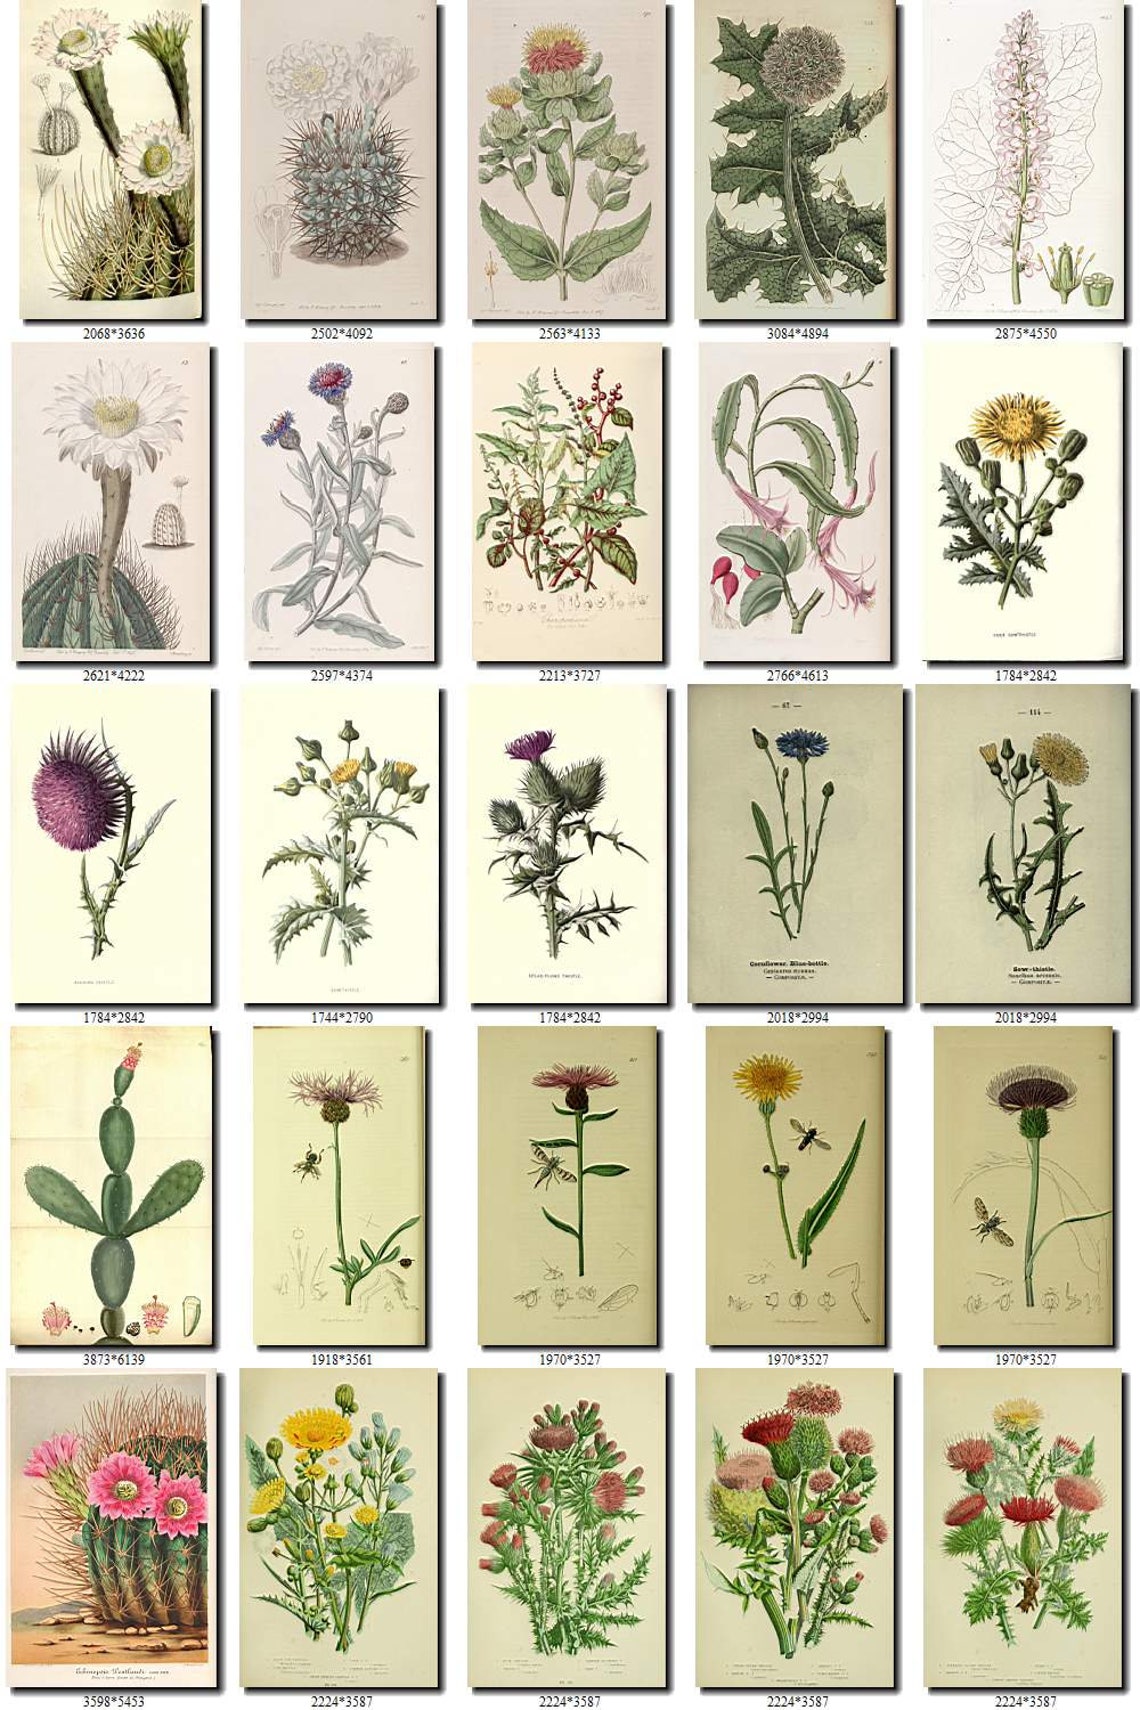 THISTLE-1 Collection of 230 vintage images botanical picture | Etsy